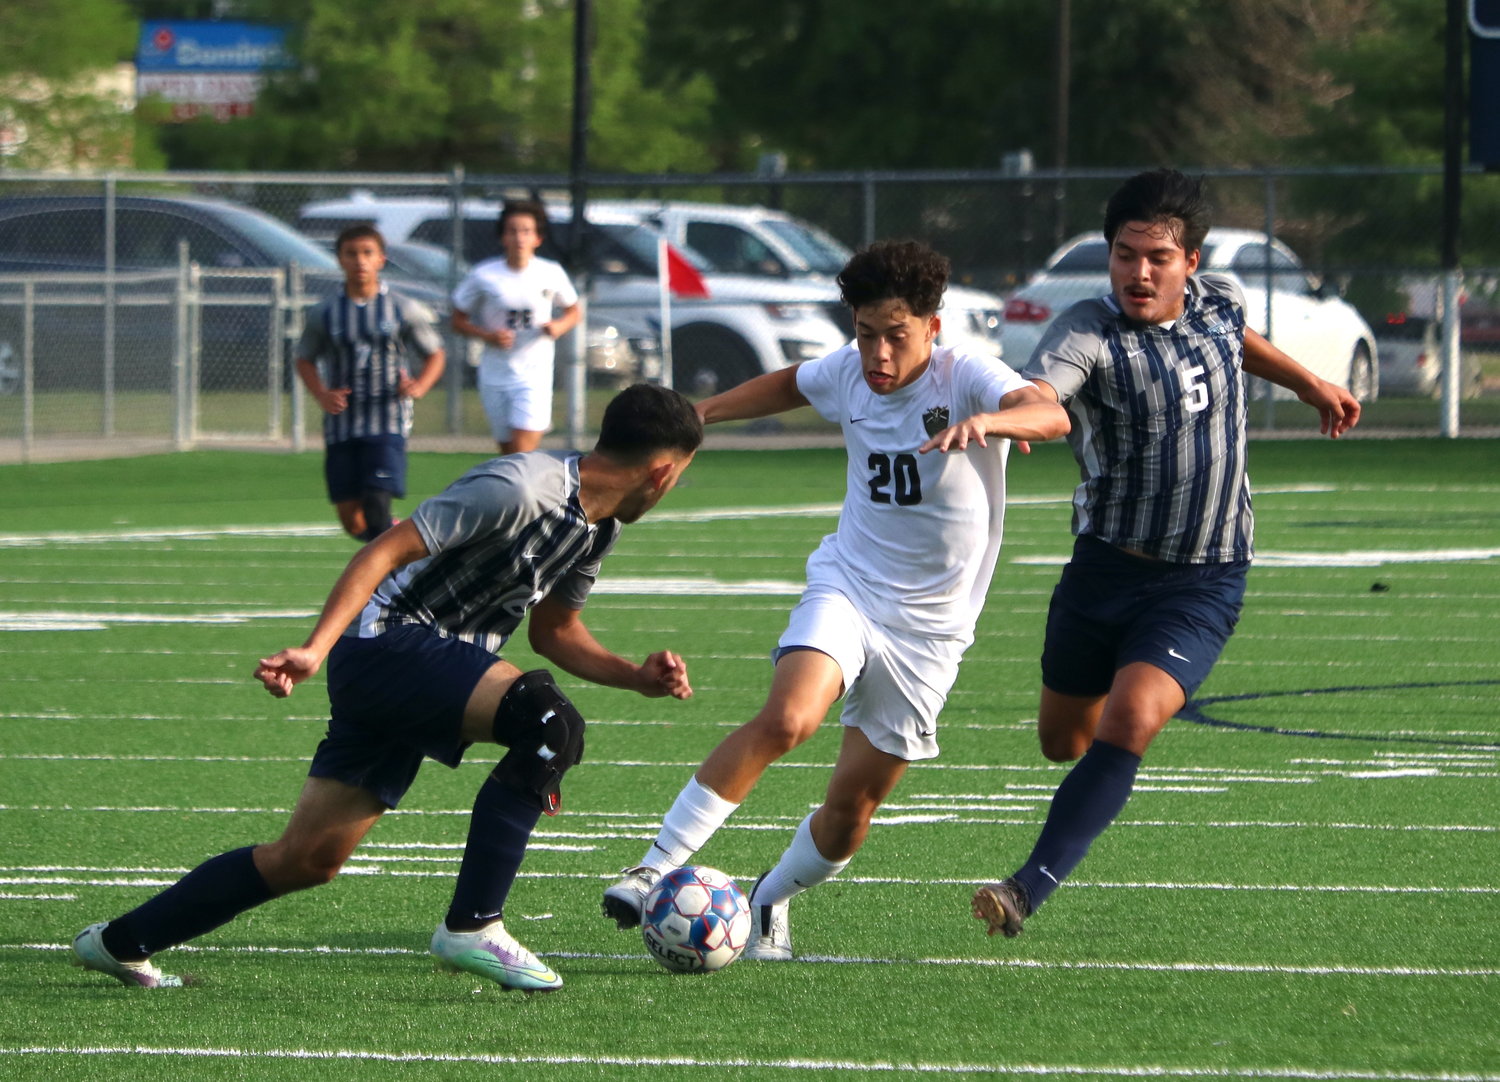 Kevin Sanoja dribbles through defenders during Tuesday's match between Jordan and Cy-Ridge at the Spring Woods football field.